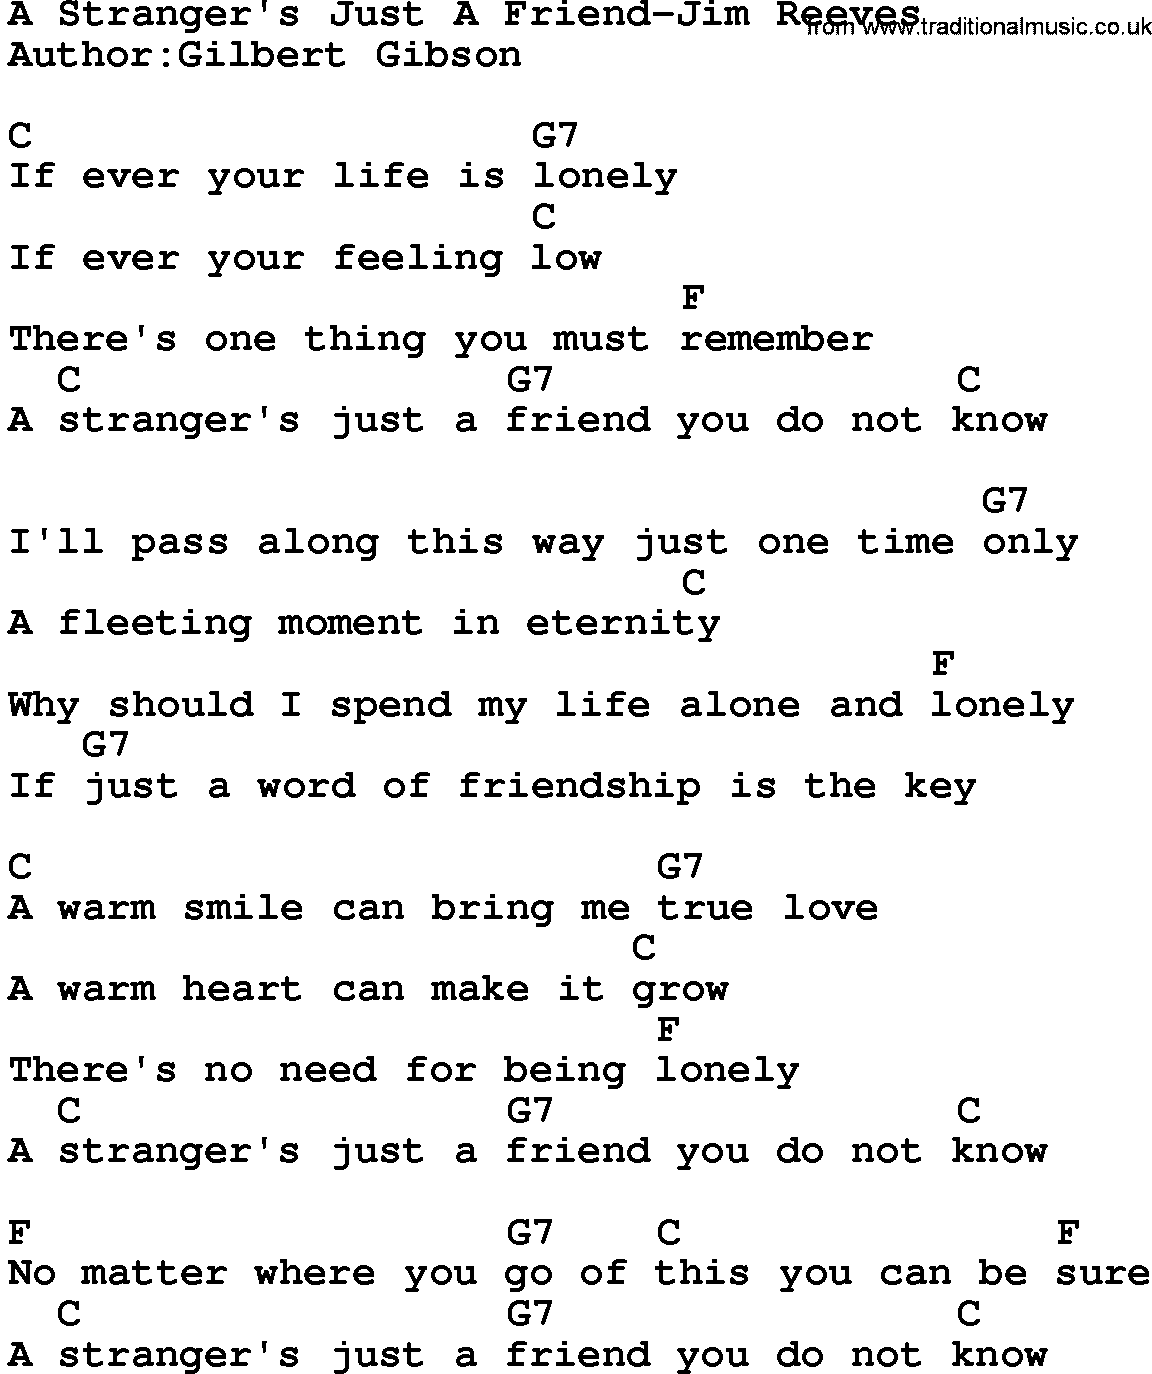 Country music song: A Stranger's Just A Friend-Jim Reeves lyrics and chords